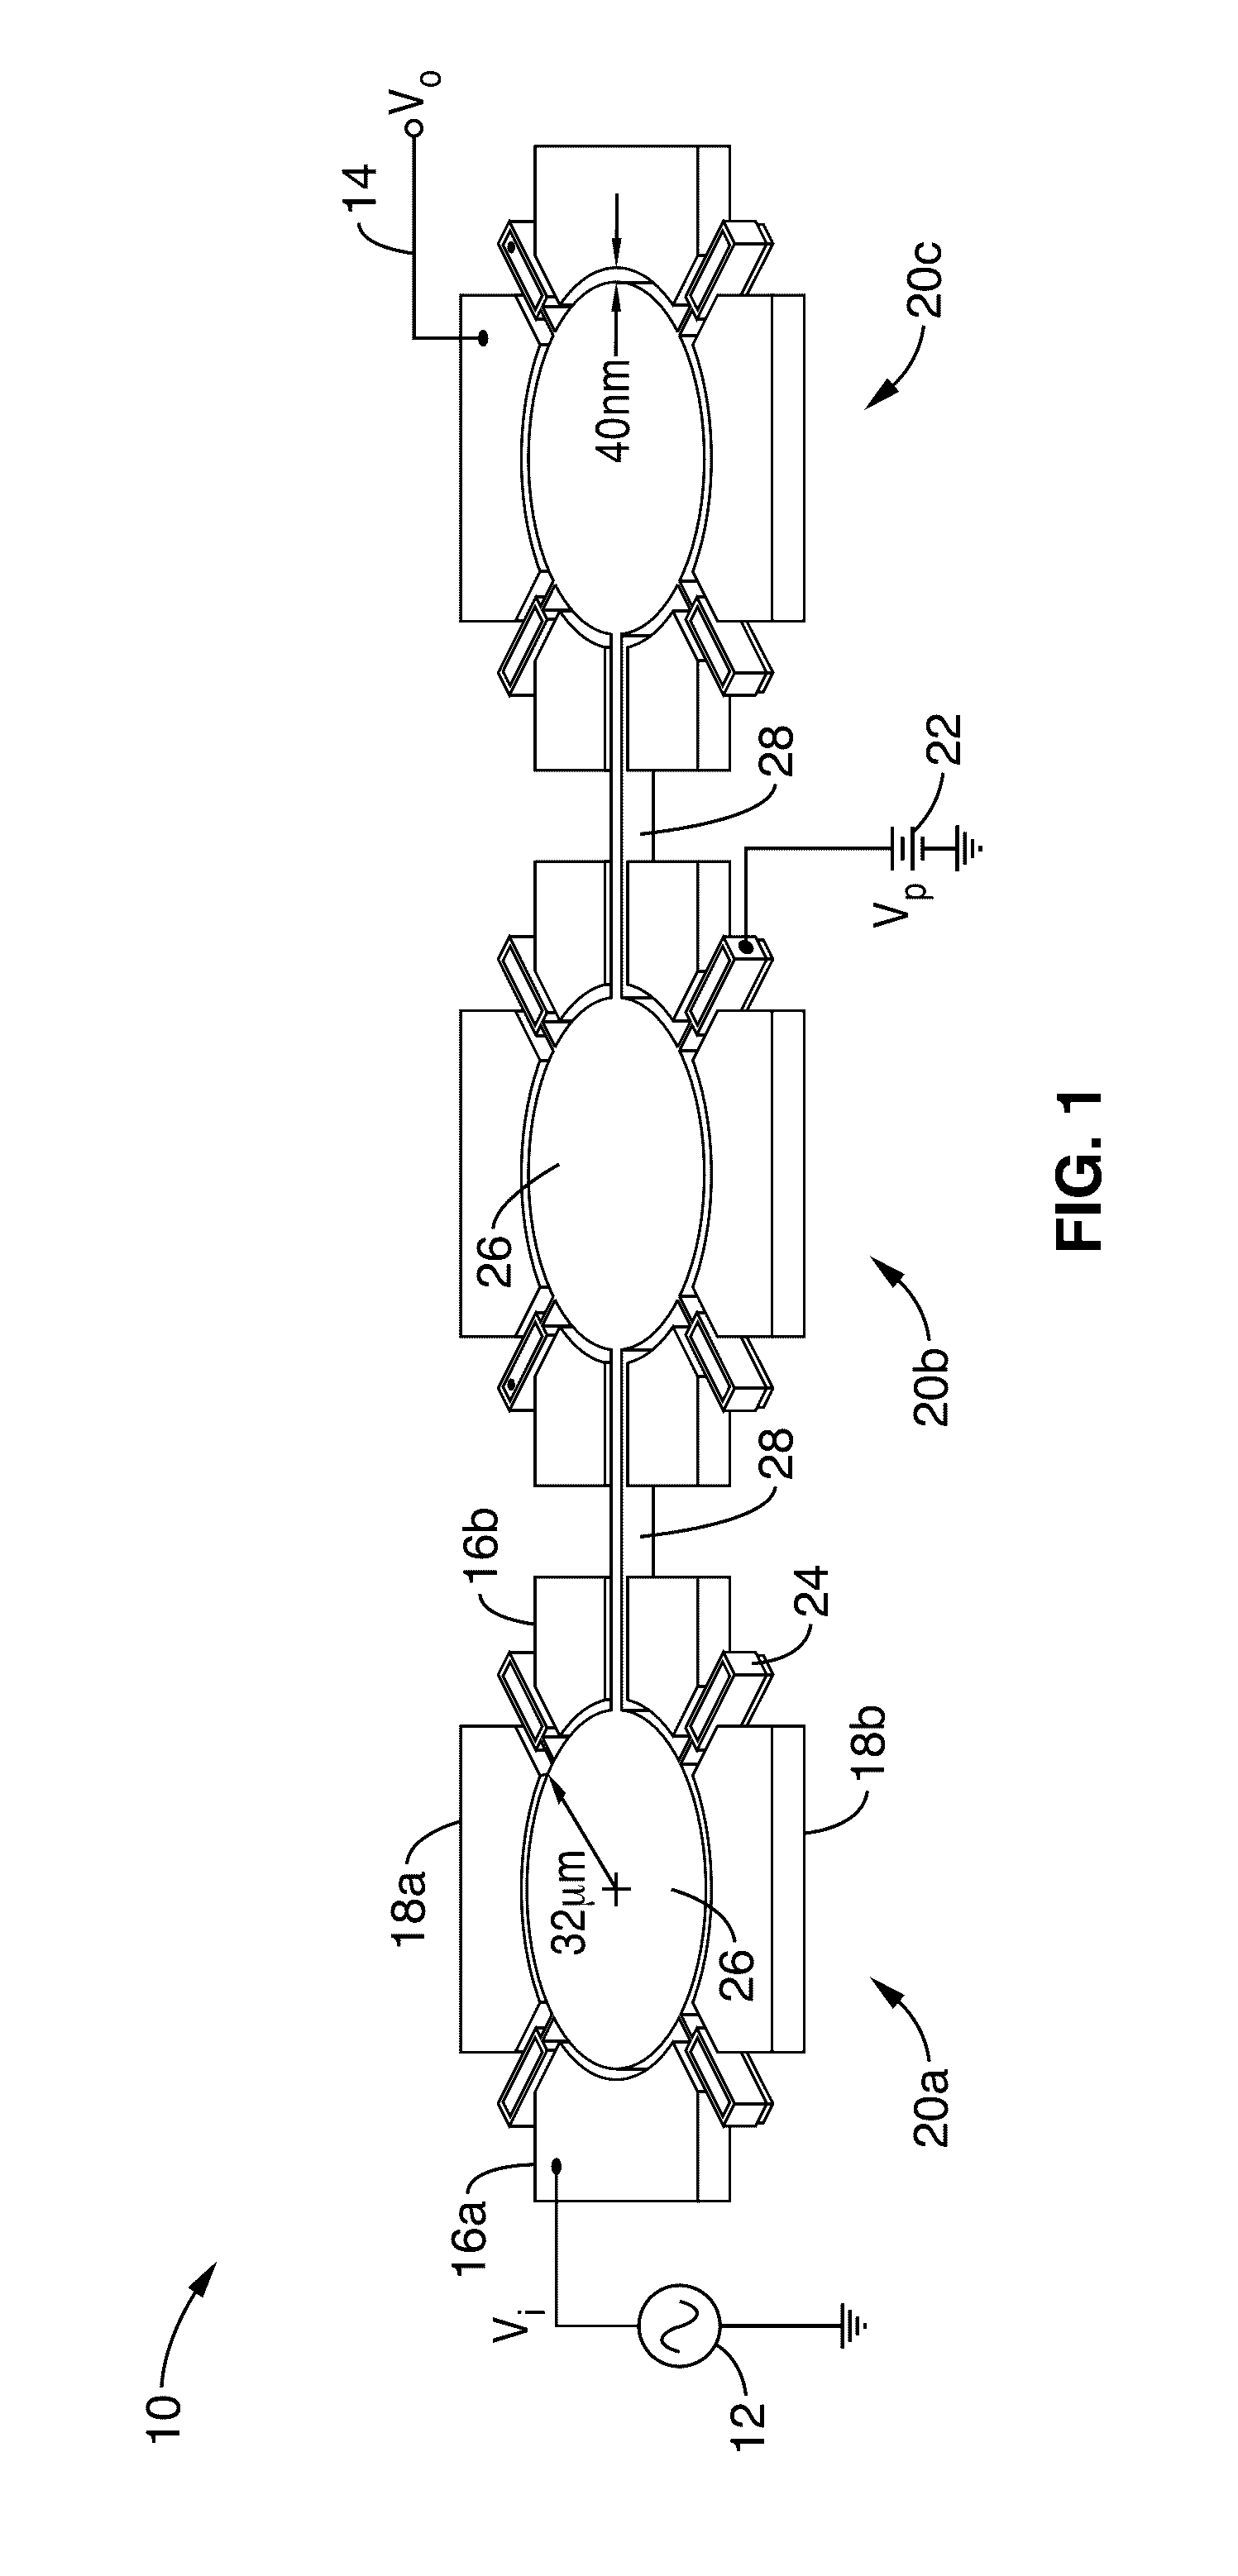 Micromechanical frequency divider